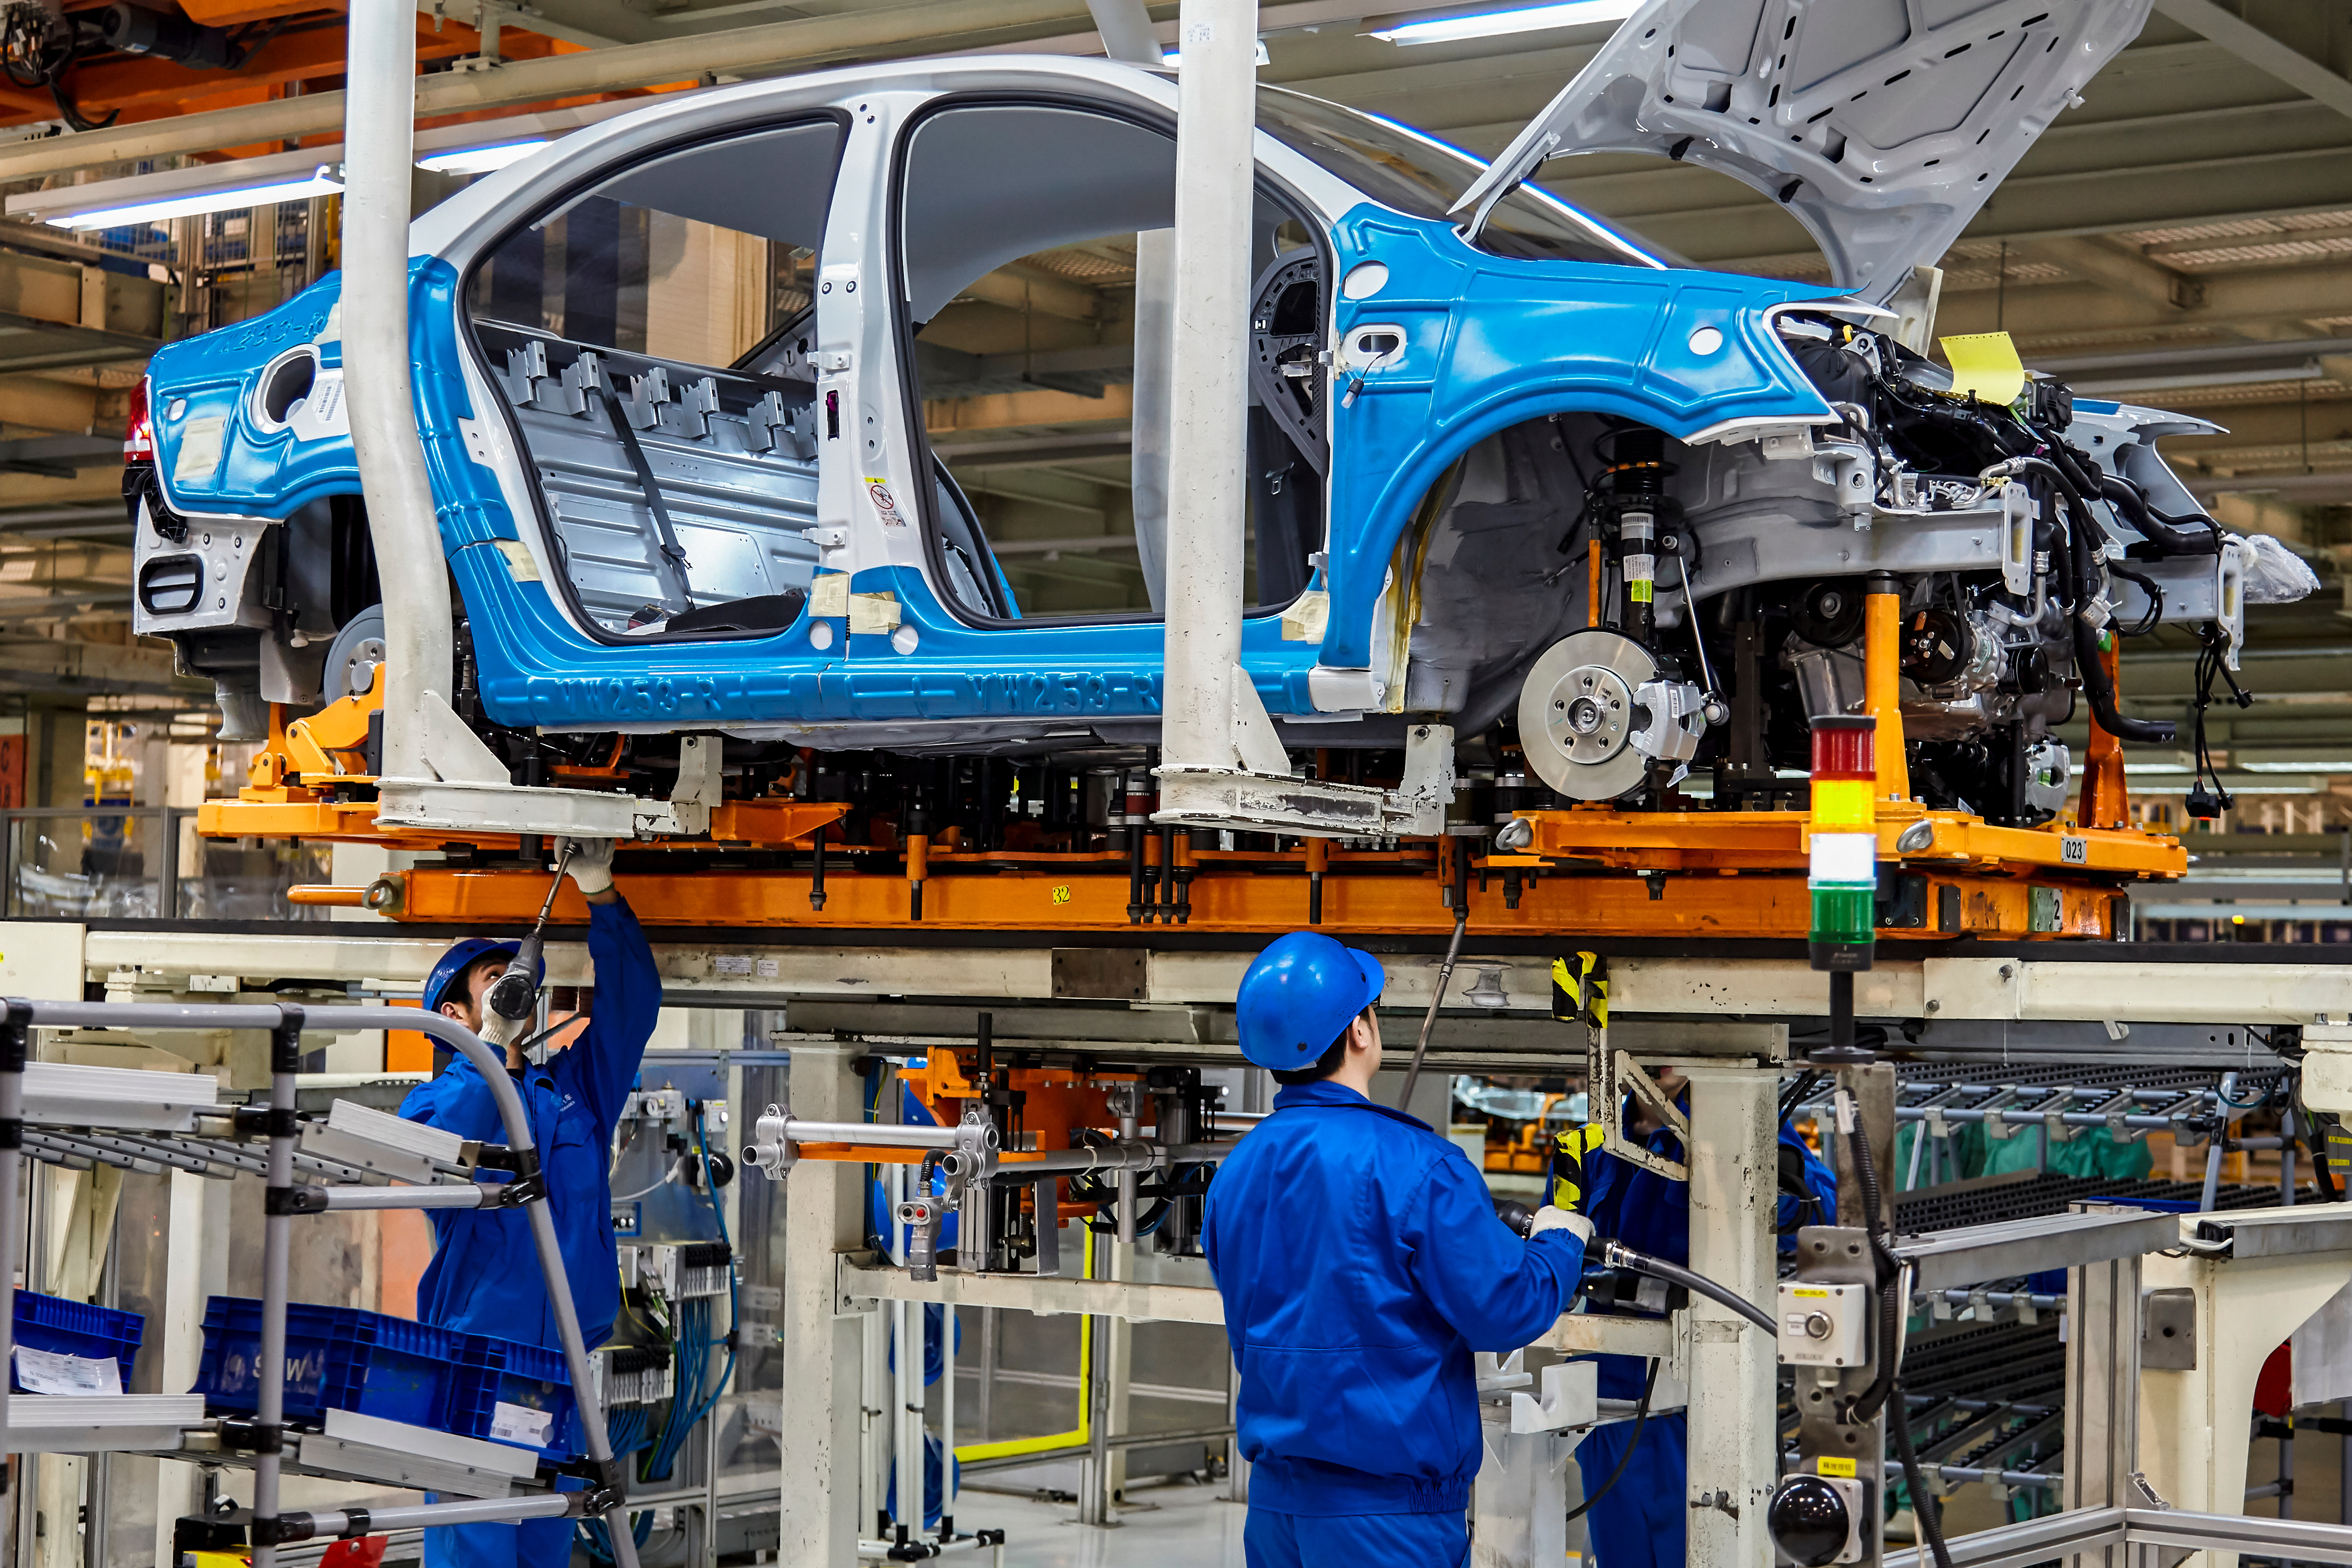 Photo: workers installing car chassis in the Shanghai Volkswagen production plant Photo credit: Jenson / Shutterstock.com